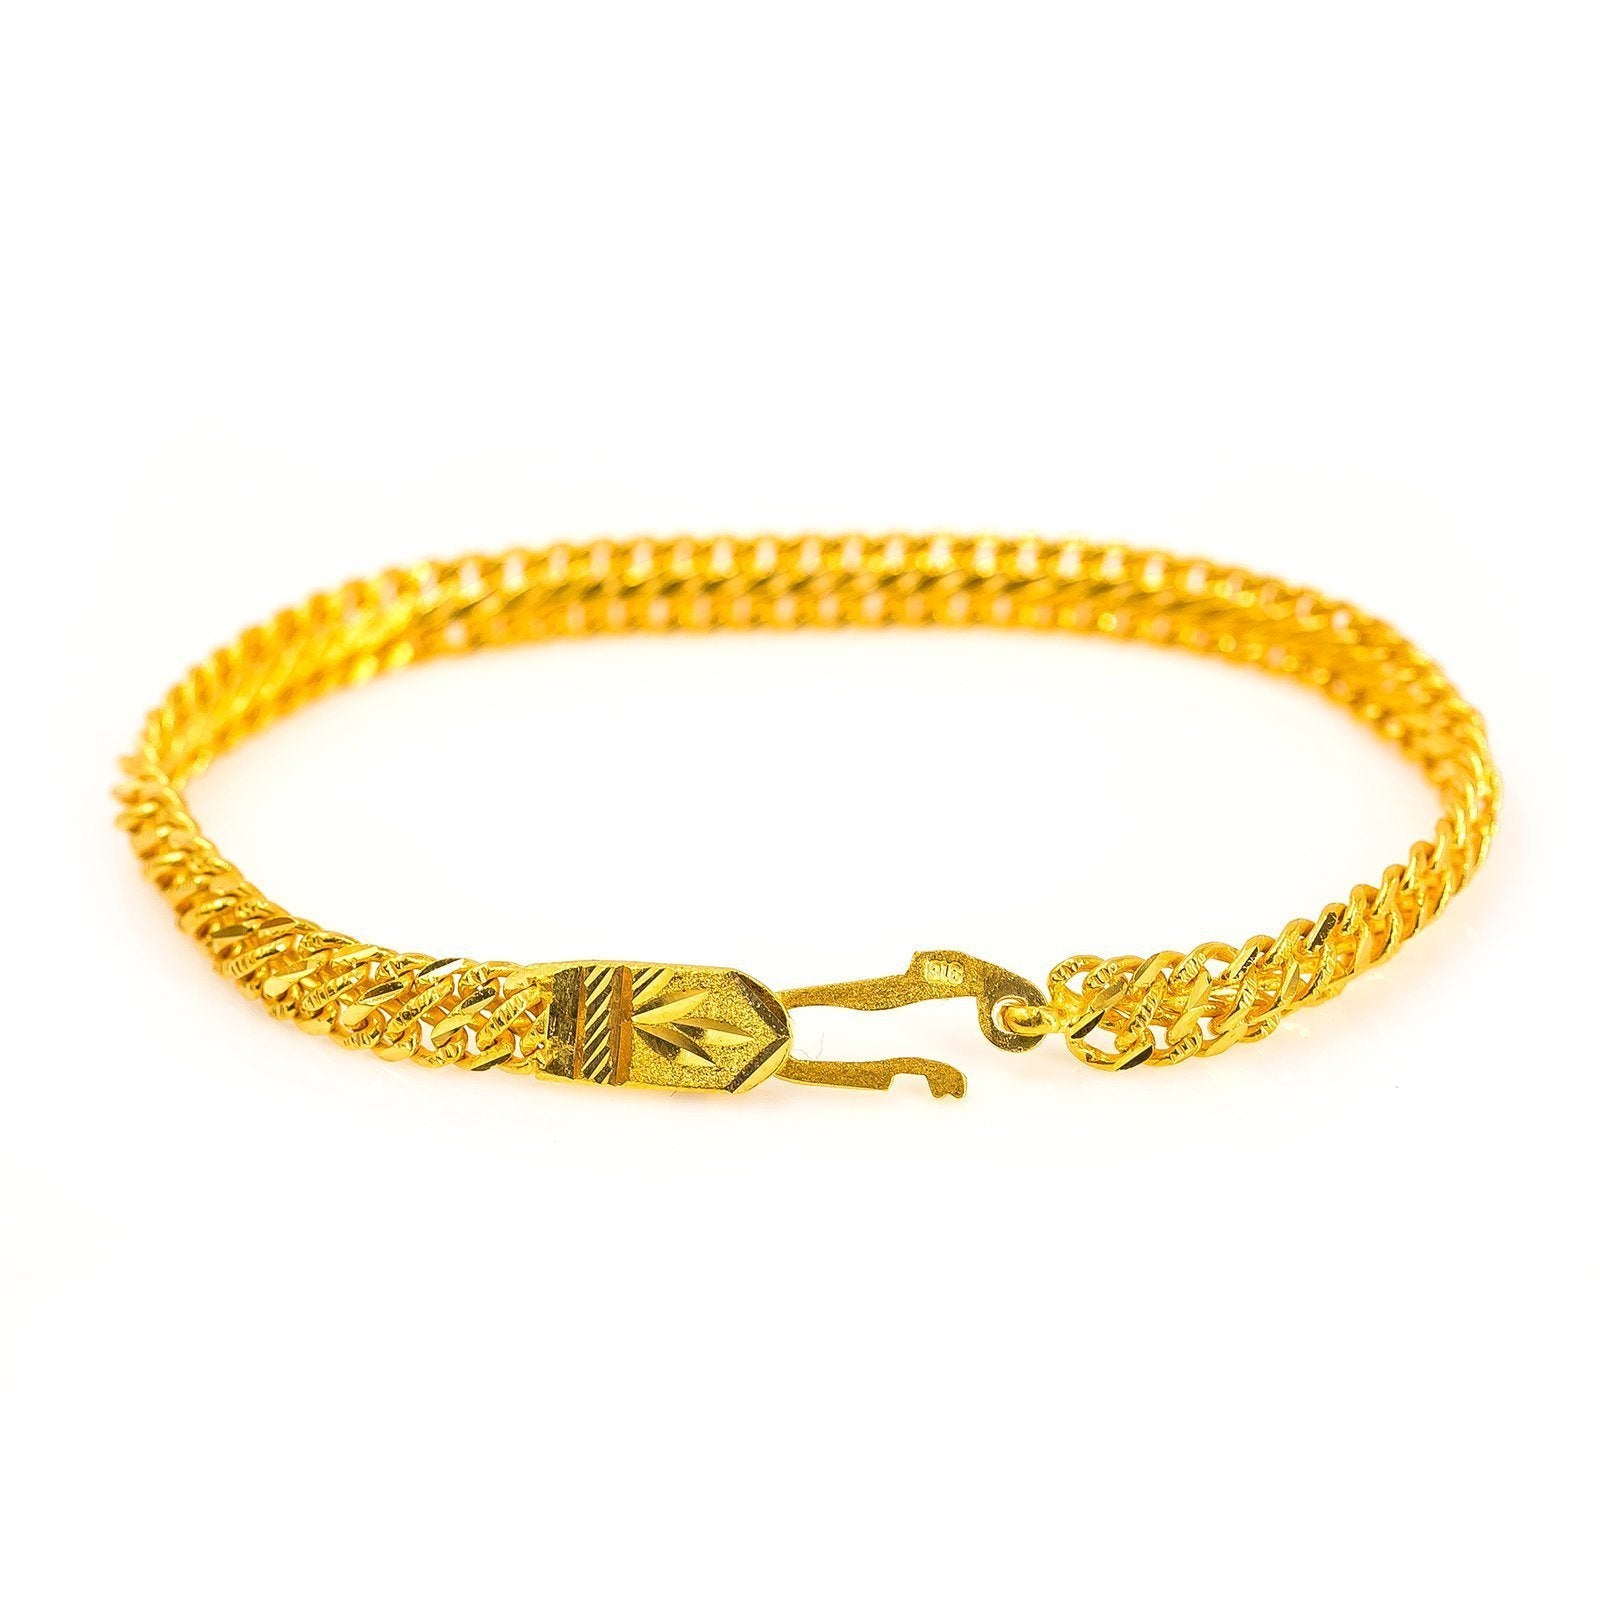 22K Yellow Gold Bracelet W/ Textured Chain & Light Etched Leaf on